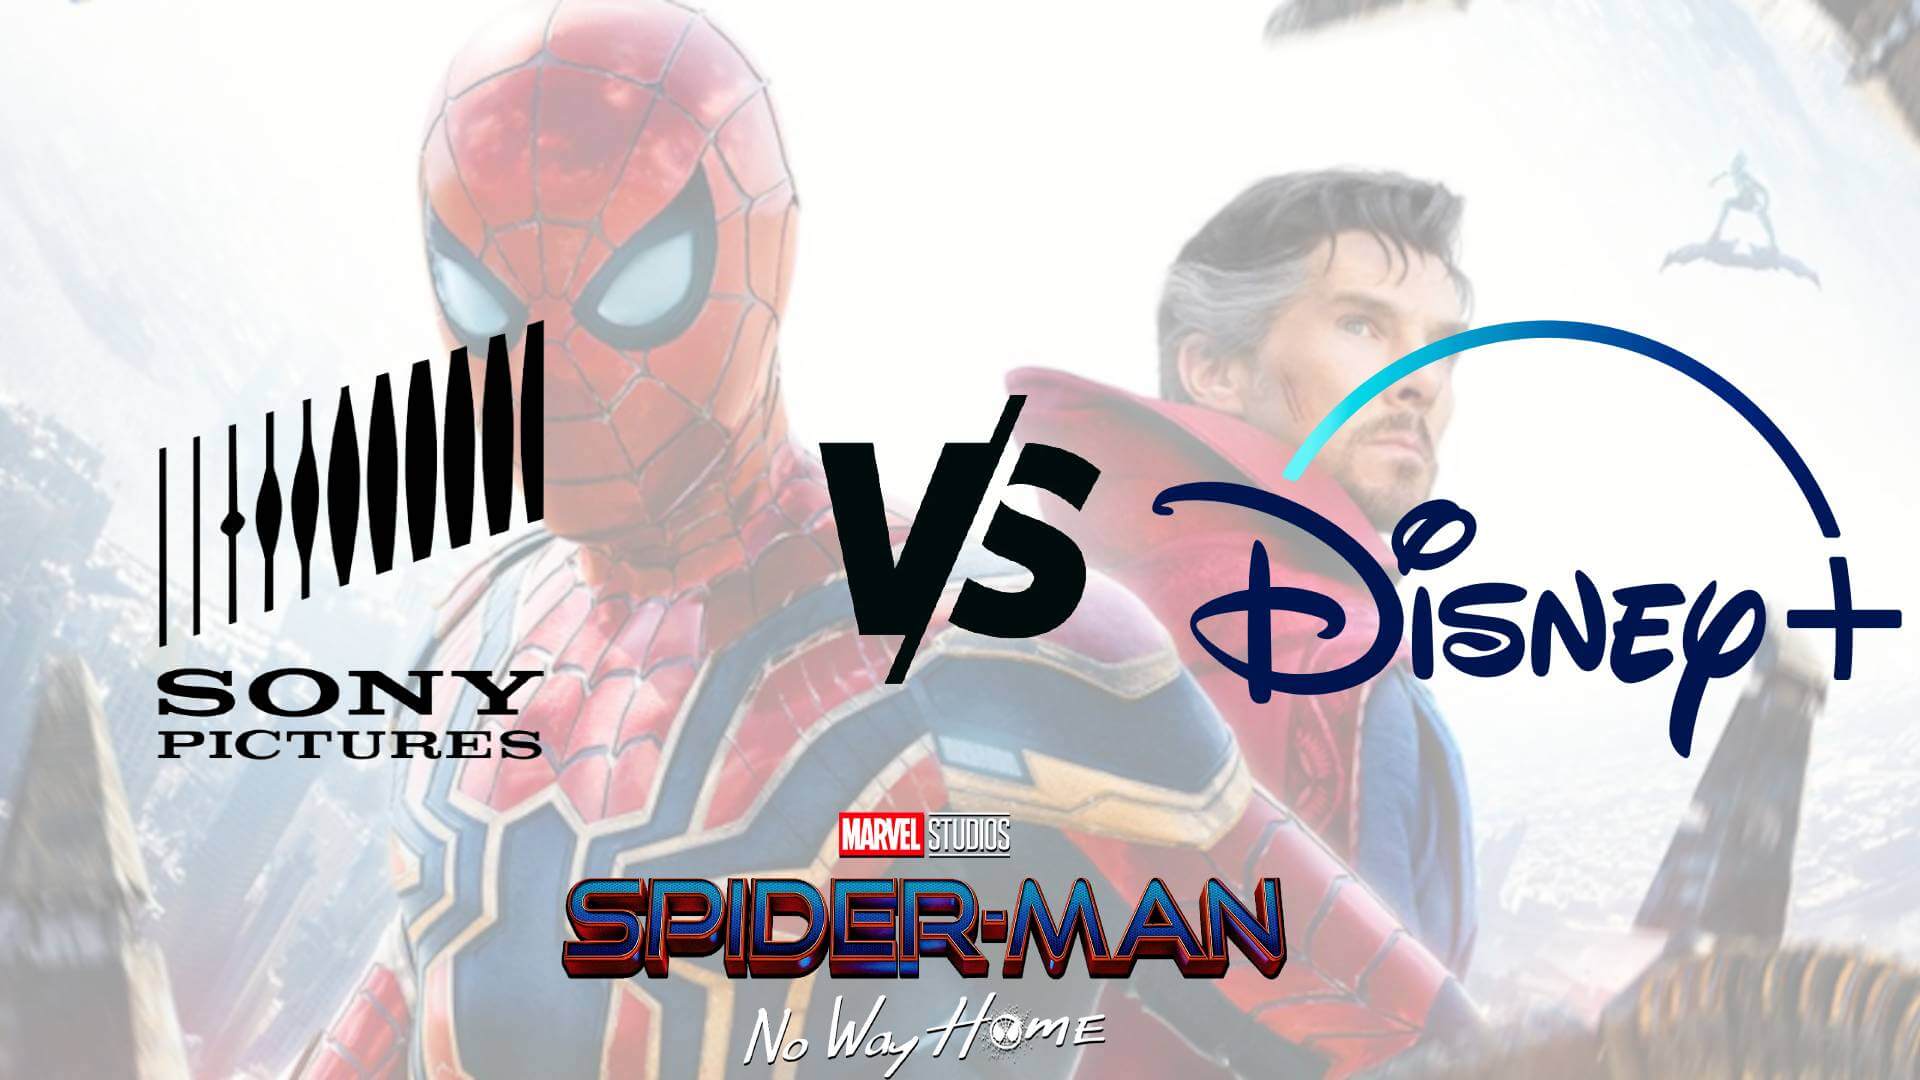 Sony Beat Disney at their own Game No way home Box Office